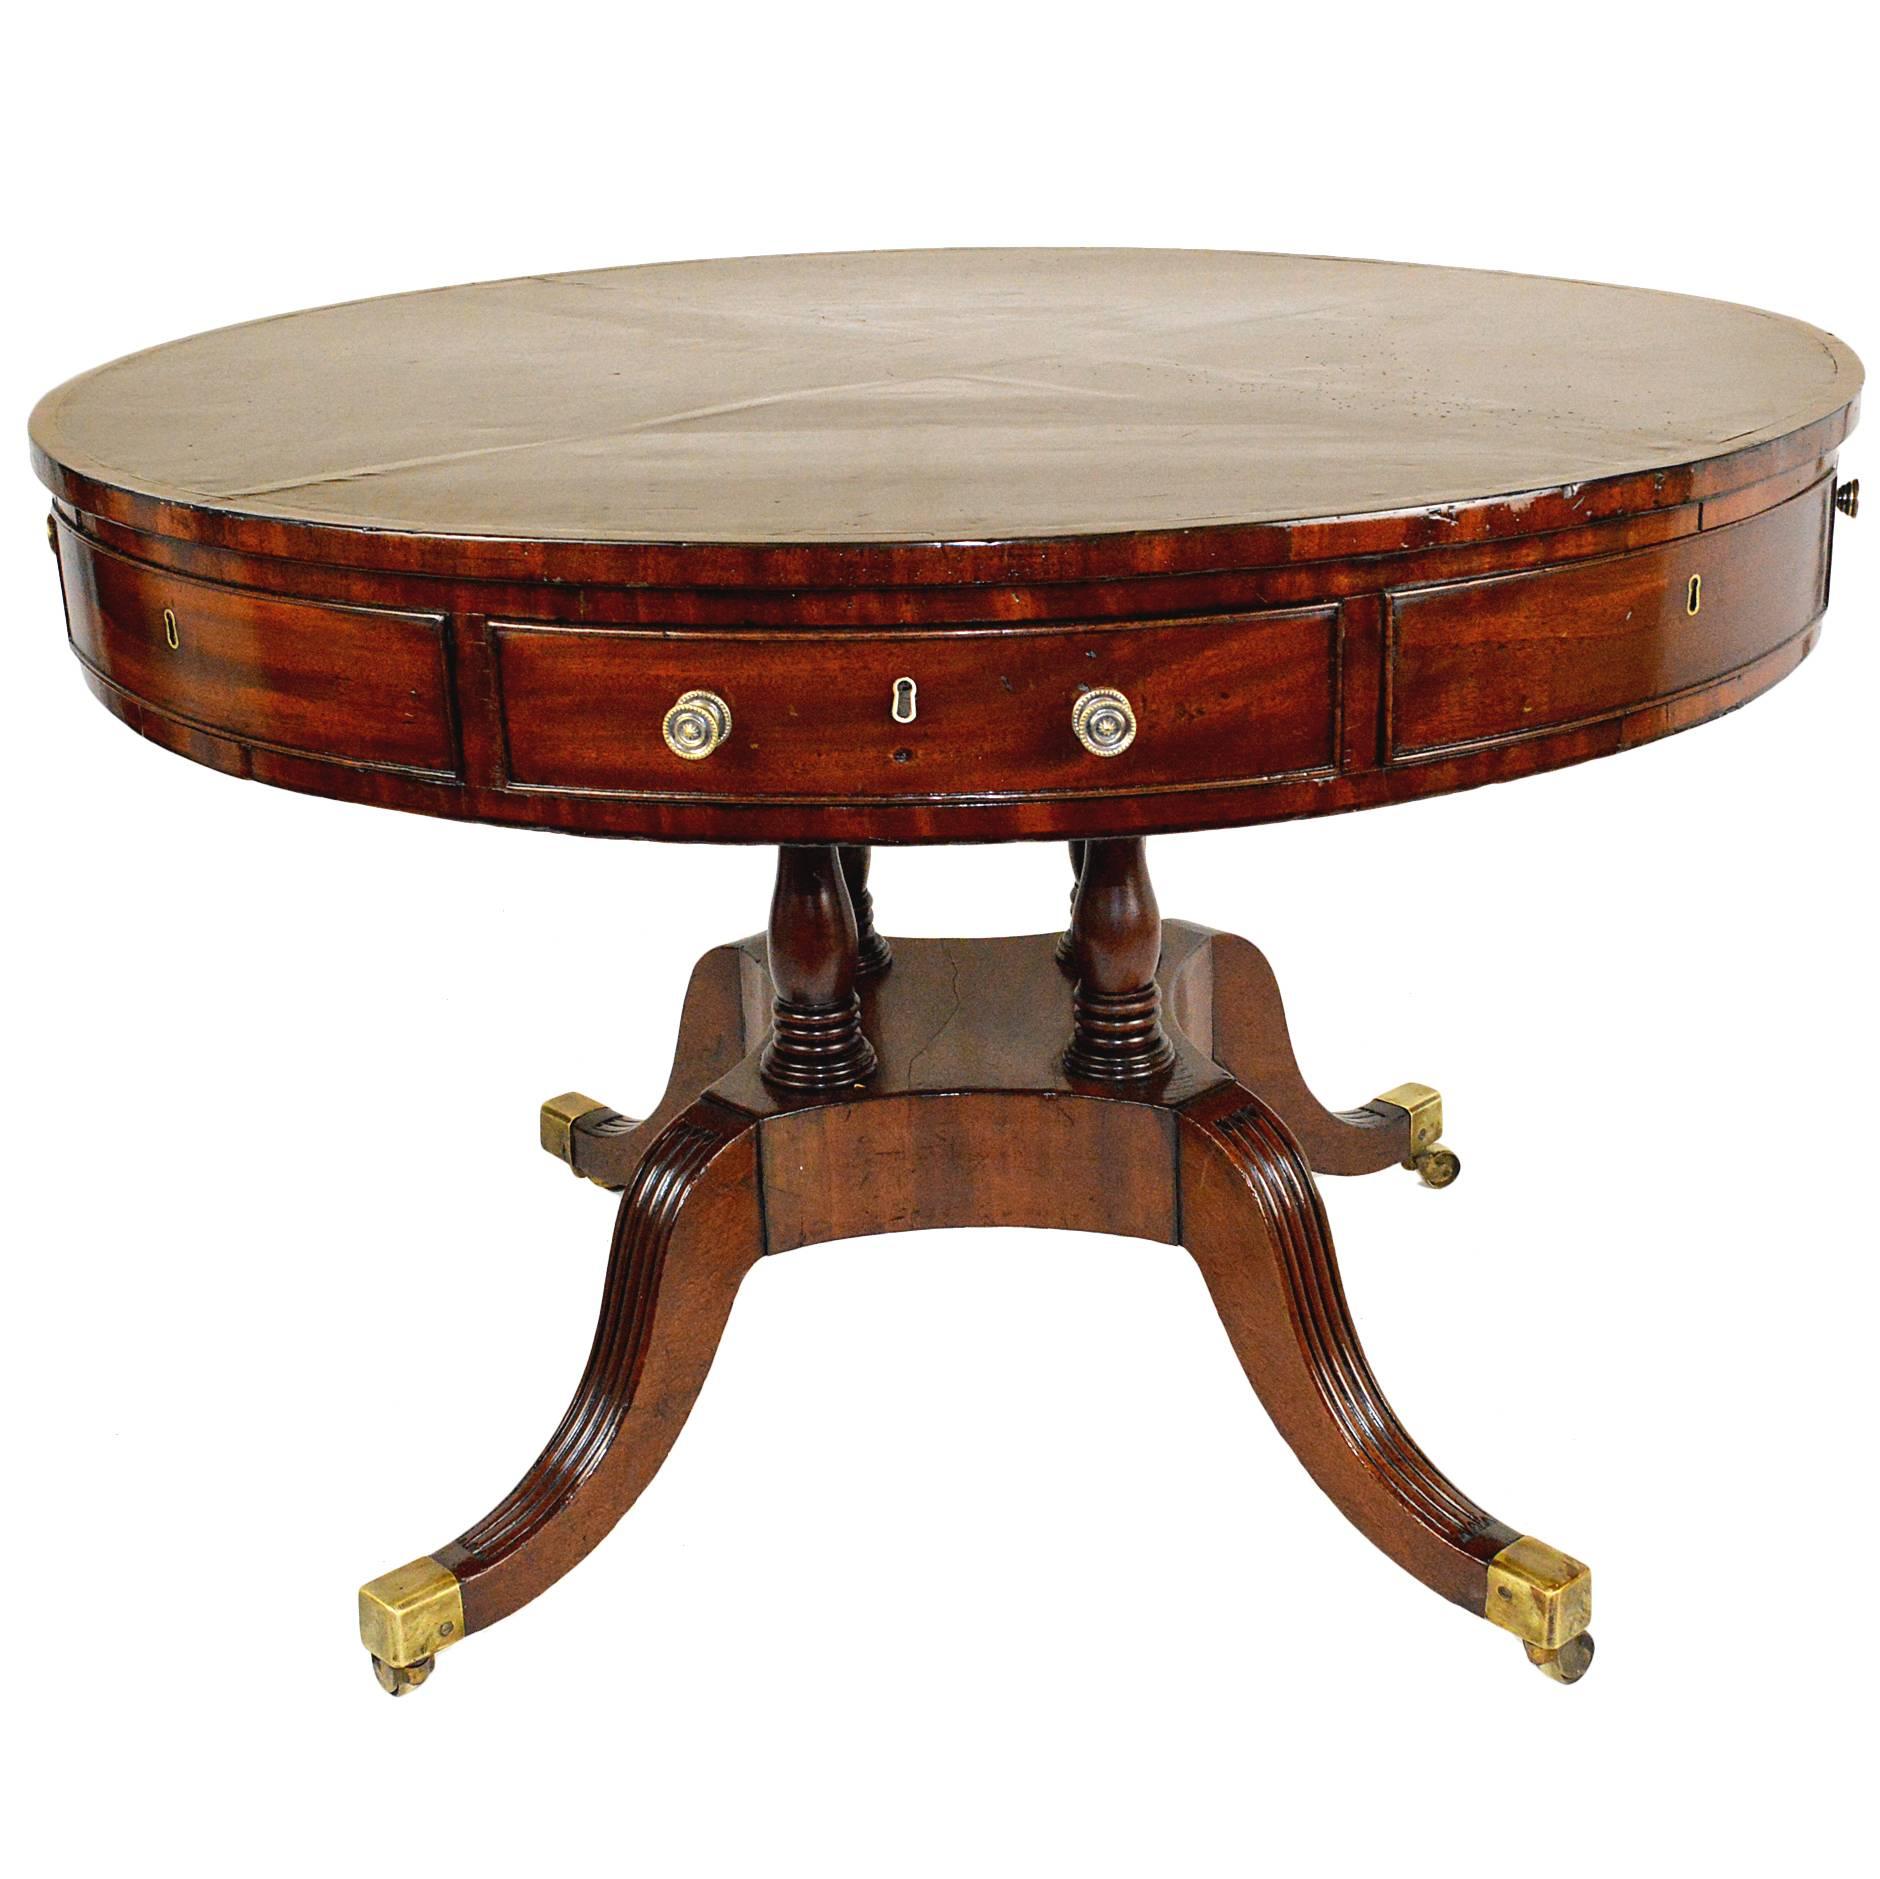 English Mahogany Inlaid Leather Top Rent/Drum Table For Sale